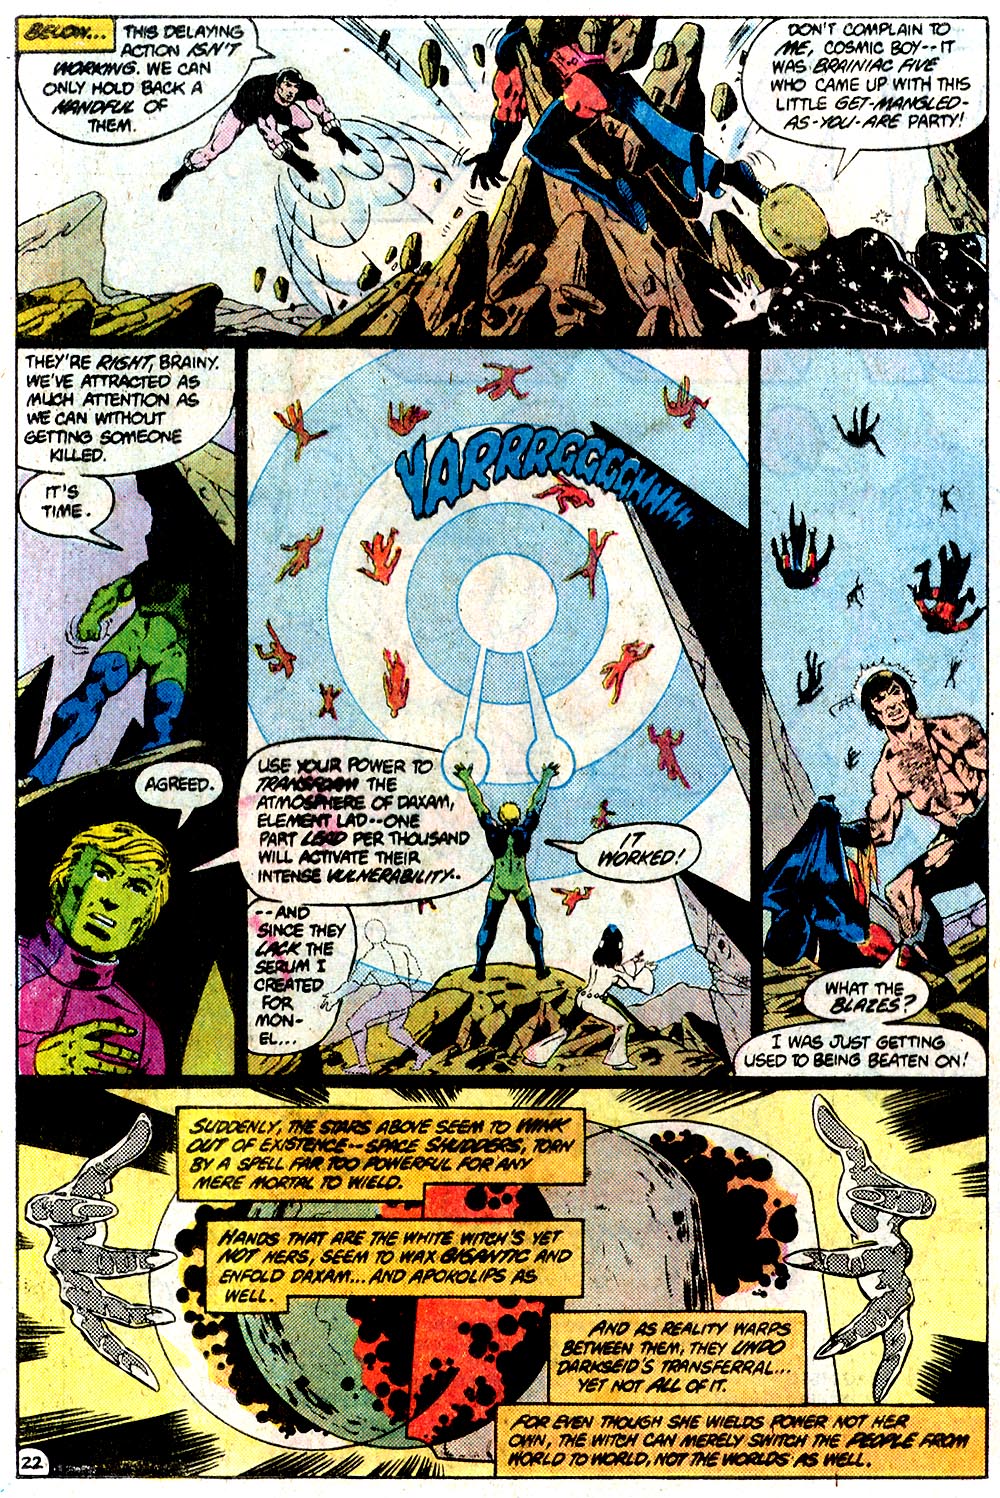 Legion of Super-Heroes (1980) 294 Page 22